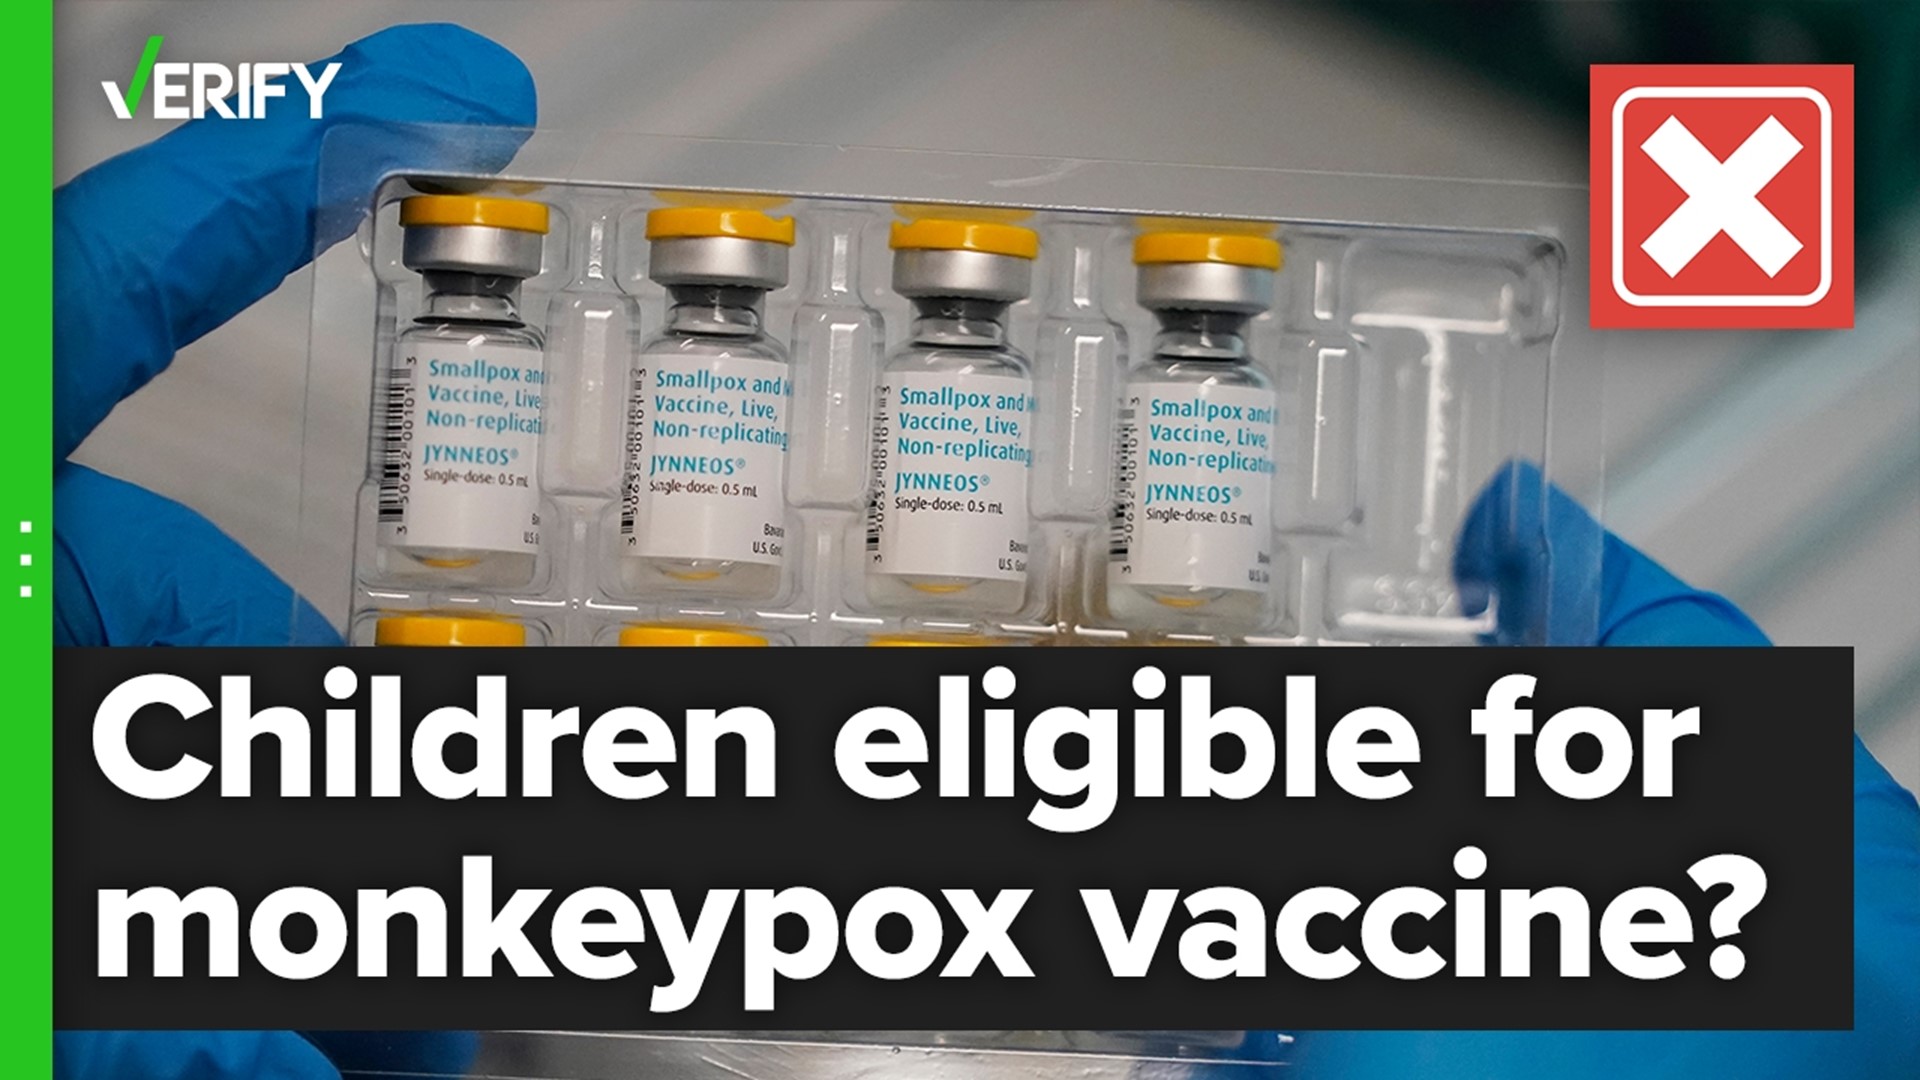 Monkeypox vaccines are not available to most people, including children, but there are exceptions if they’ve been directly exposed to the virus.